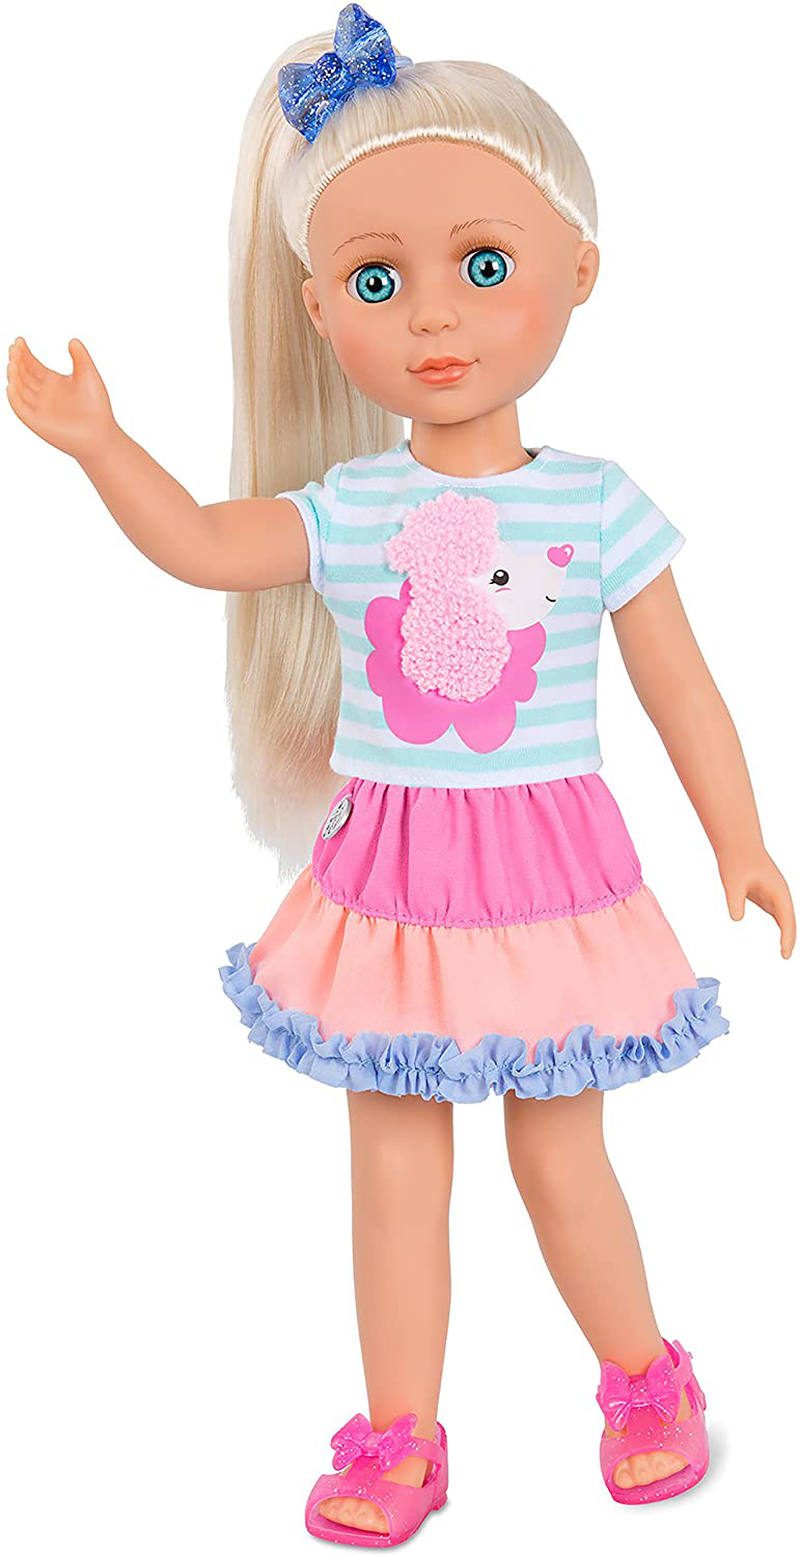 Glitter Girls Dolls by Battat – Poodle Cuddles Fashion Outfit with Hair Bow – 14-inch Doll Clothes and Accessories for Kids Ages 3 and Up – Children’s Toys, Brown/a (GG50134Z)